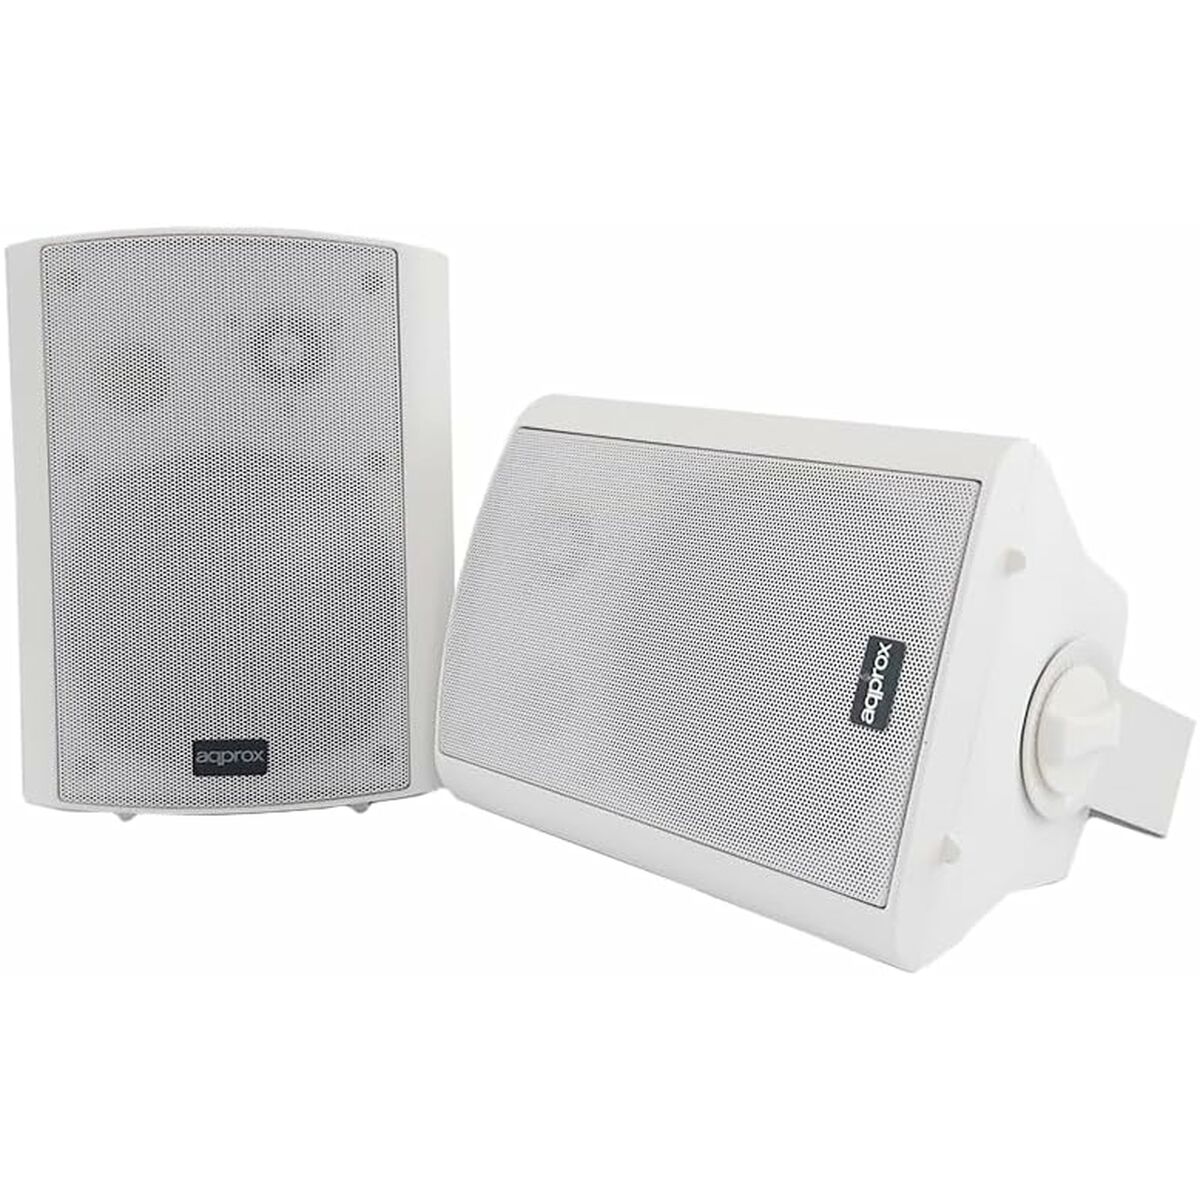 Speakers approx! APPSPK+ 30 W, approx!, Electronics, Audio and Hi-Fi equipment, speakers-approx-appspk-30-w, Brand_approx!, category-reference-2609, category-reference-2637, category-reference-2882, category-reference-t-19653, category-reference-t-7441, category-reference-t-7442, category-reference-t-7447, cinema and television, Condition_NEW, entertainment, music, Price_100 - 200, Teleworking, RiotNook